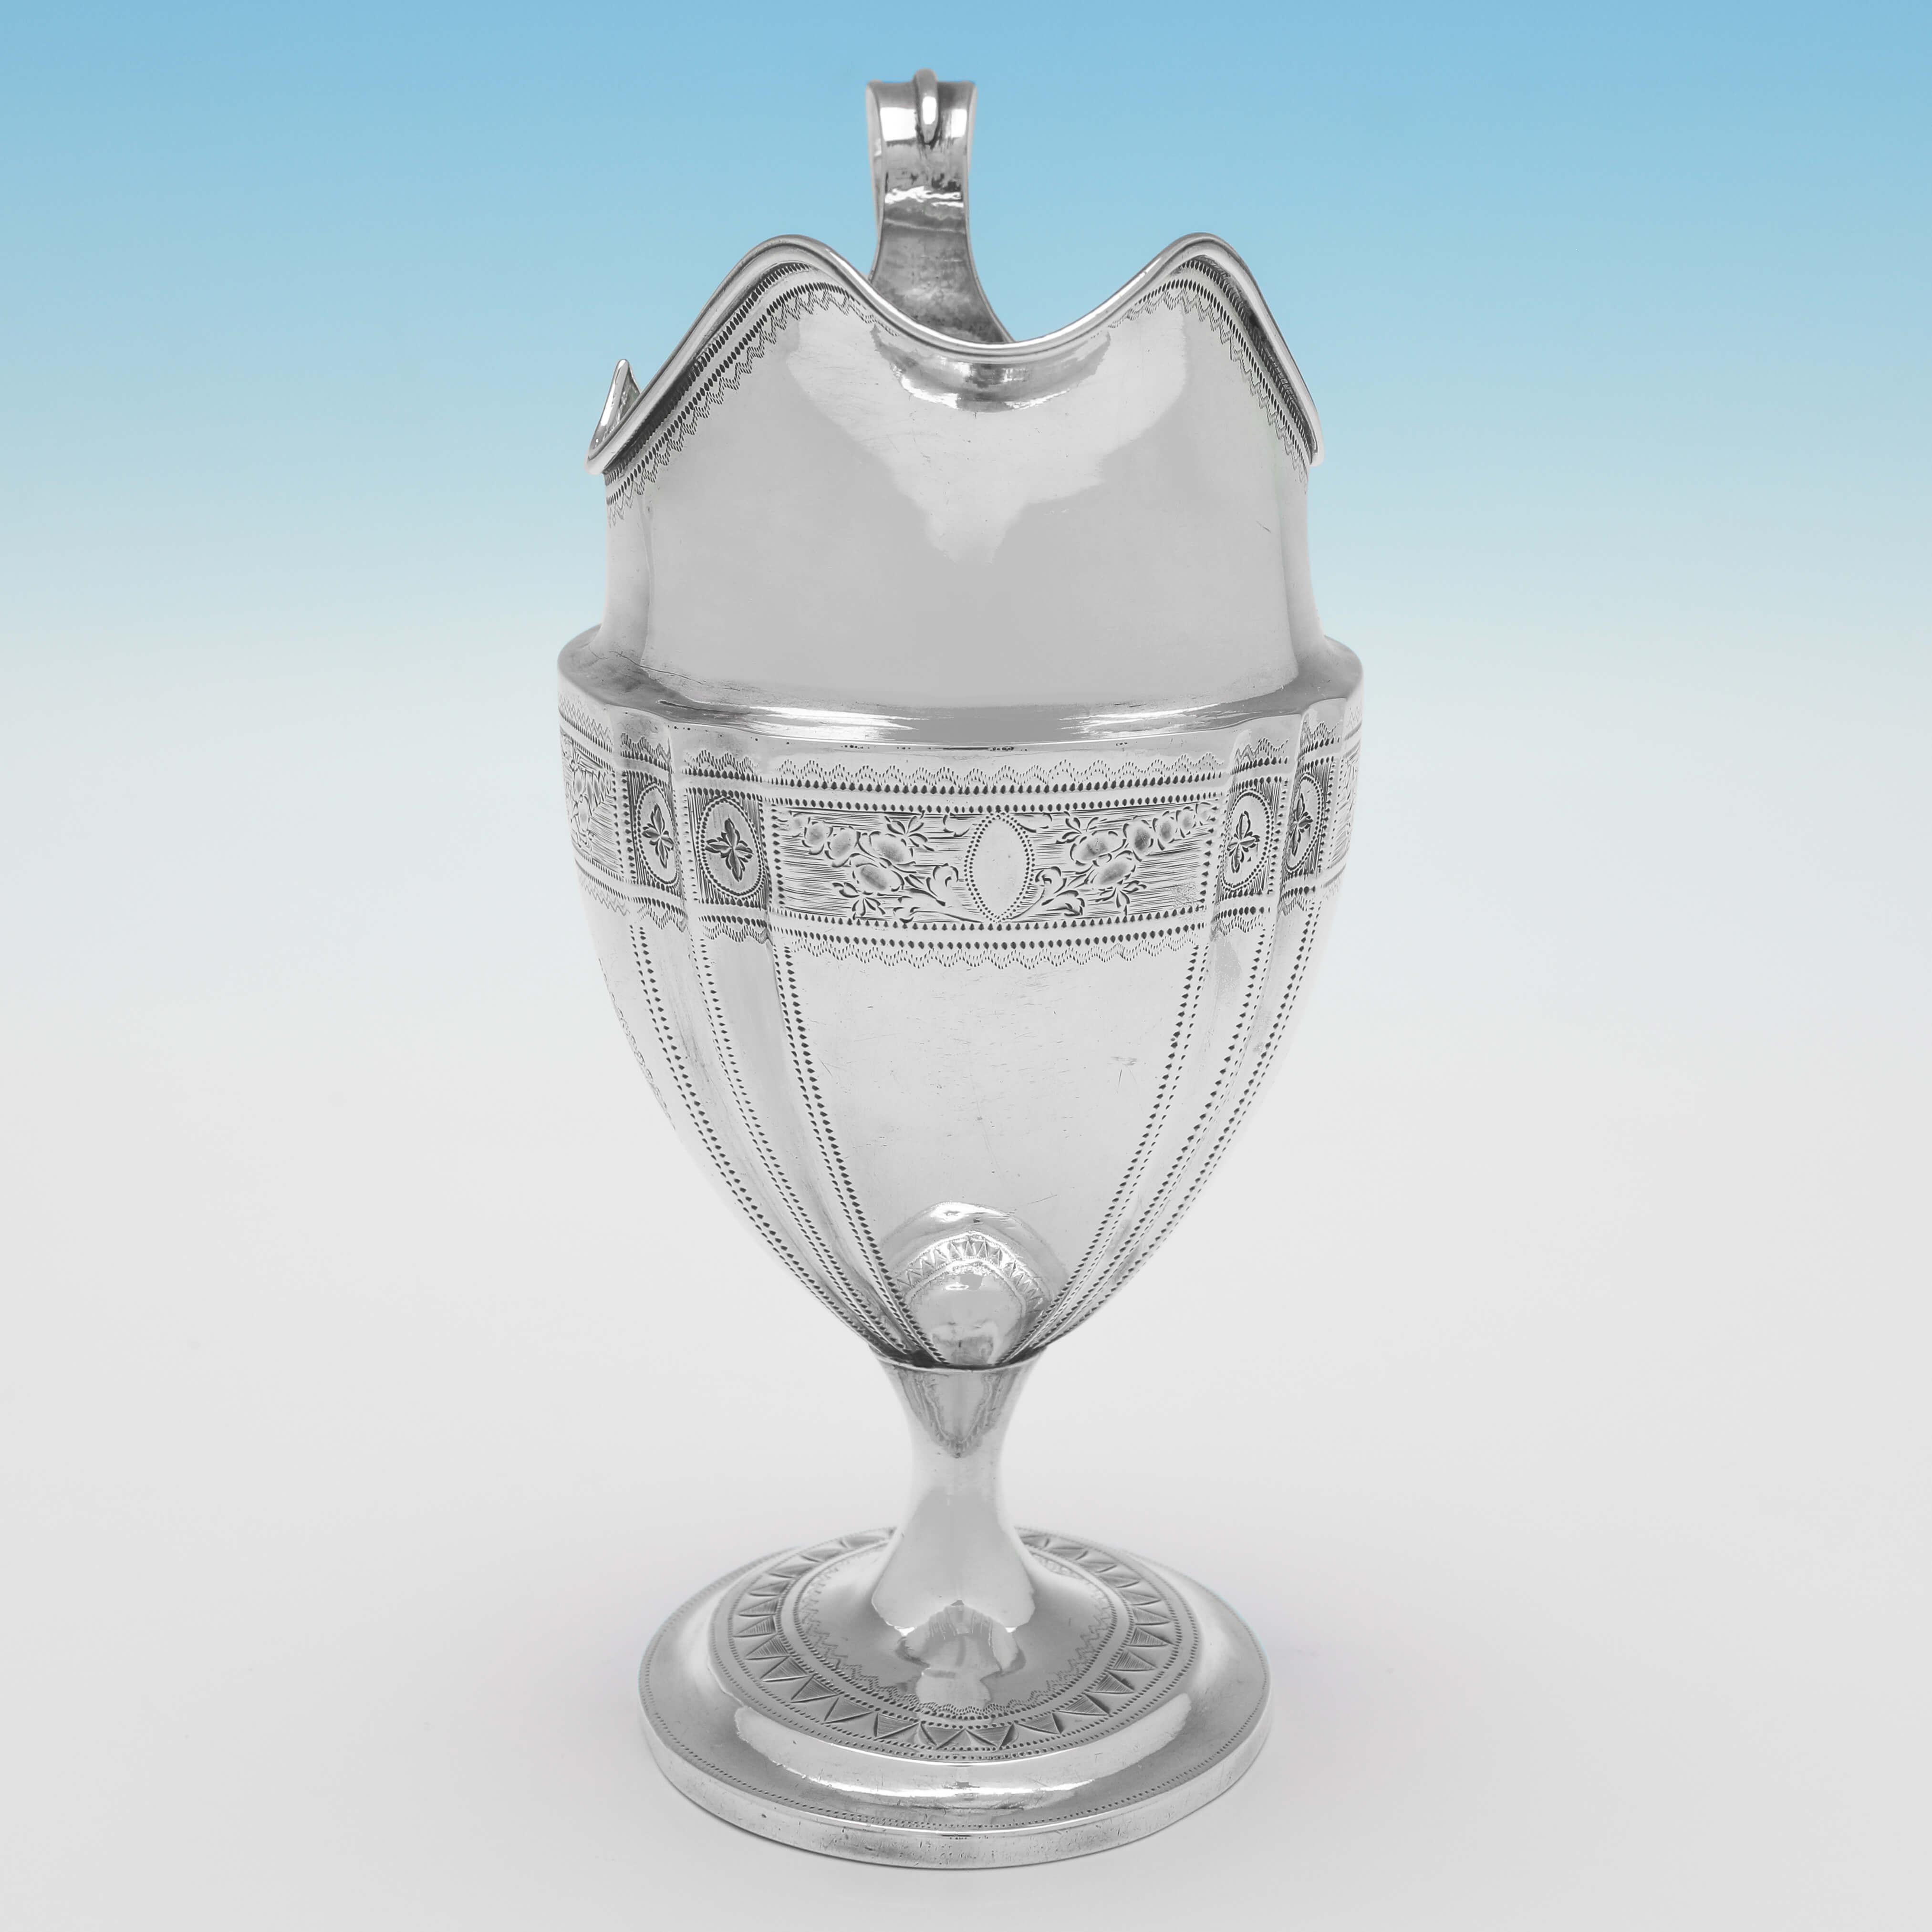 Hallmarked in Dublin in 1795 by Thomas Jones, this very attractive, Antique Sterling Silver Cream Jug, features wonderful brightcut engraved decoration to the body and foot, an engraved crest and a reed border around the rim. The cream jug measures